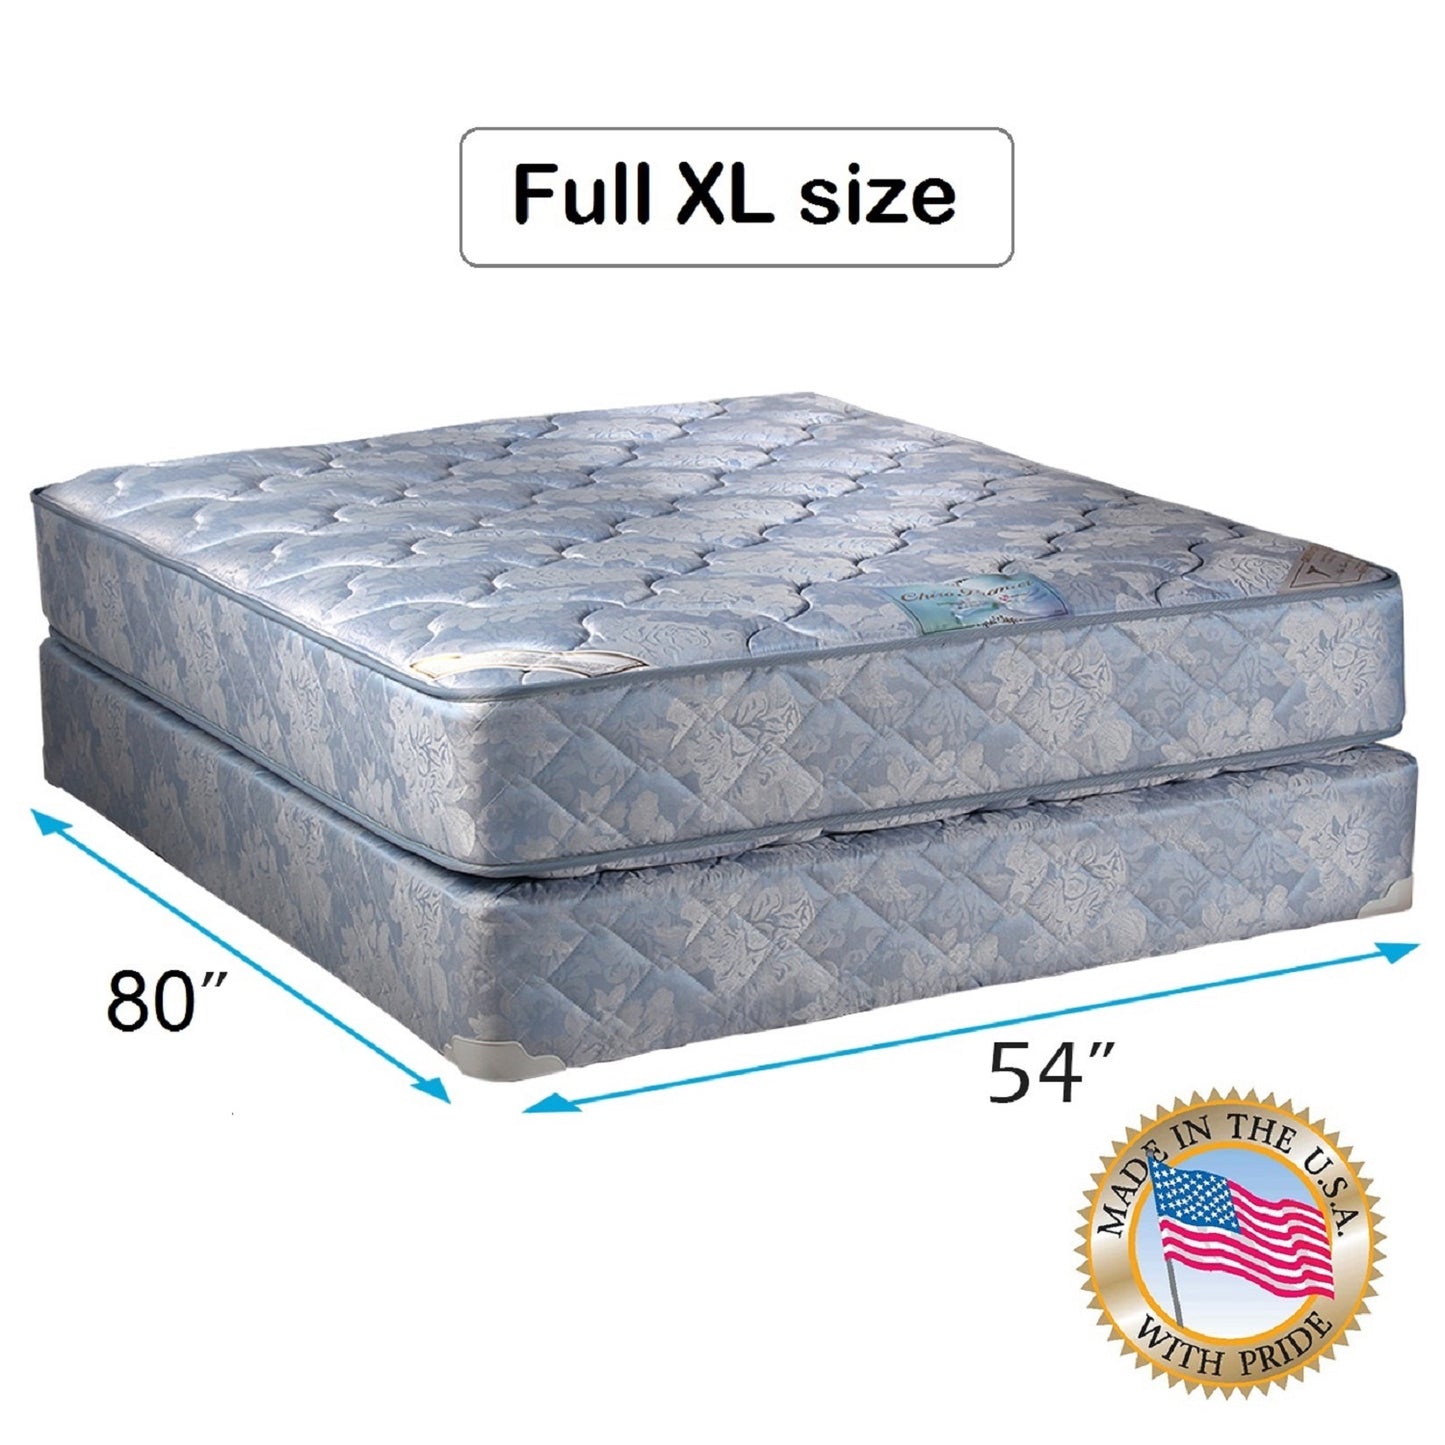 Chiro Premier Orthopedic Gentle Firm (Blue Color) Full XL Size Mattress and Box Spring Set - Fully Assembled, Good for Your Back, Long Lasting and 2 Sided